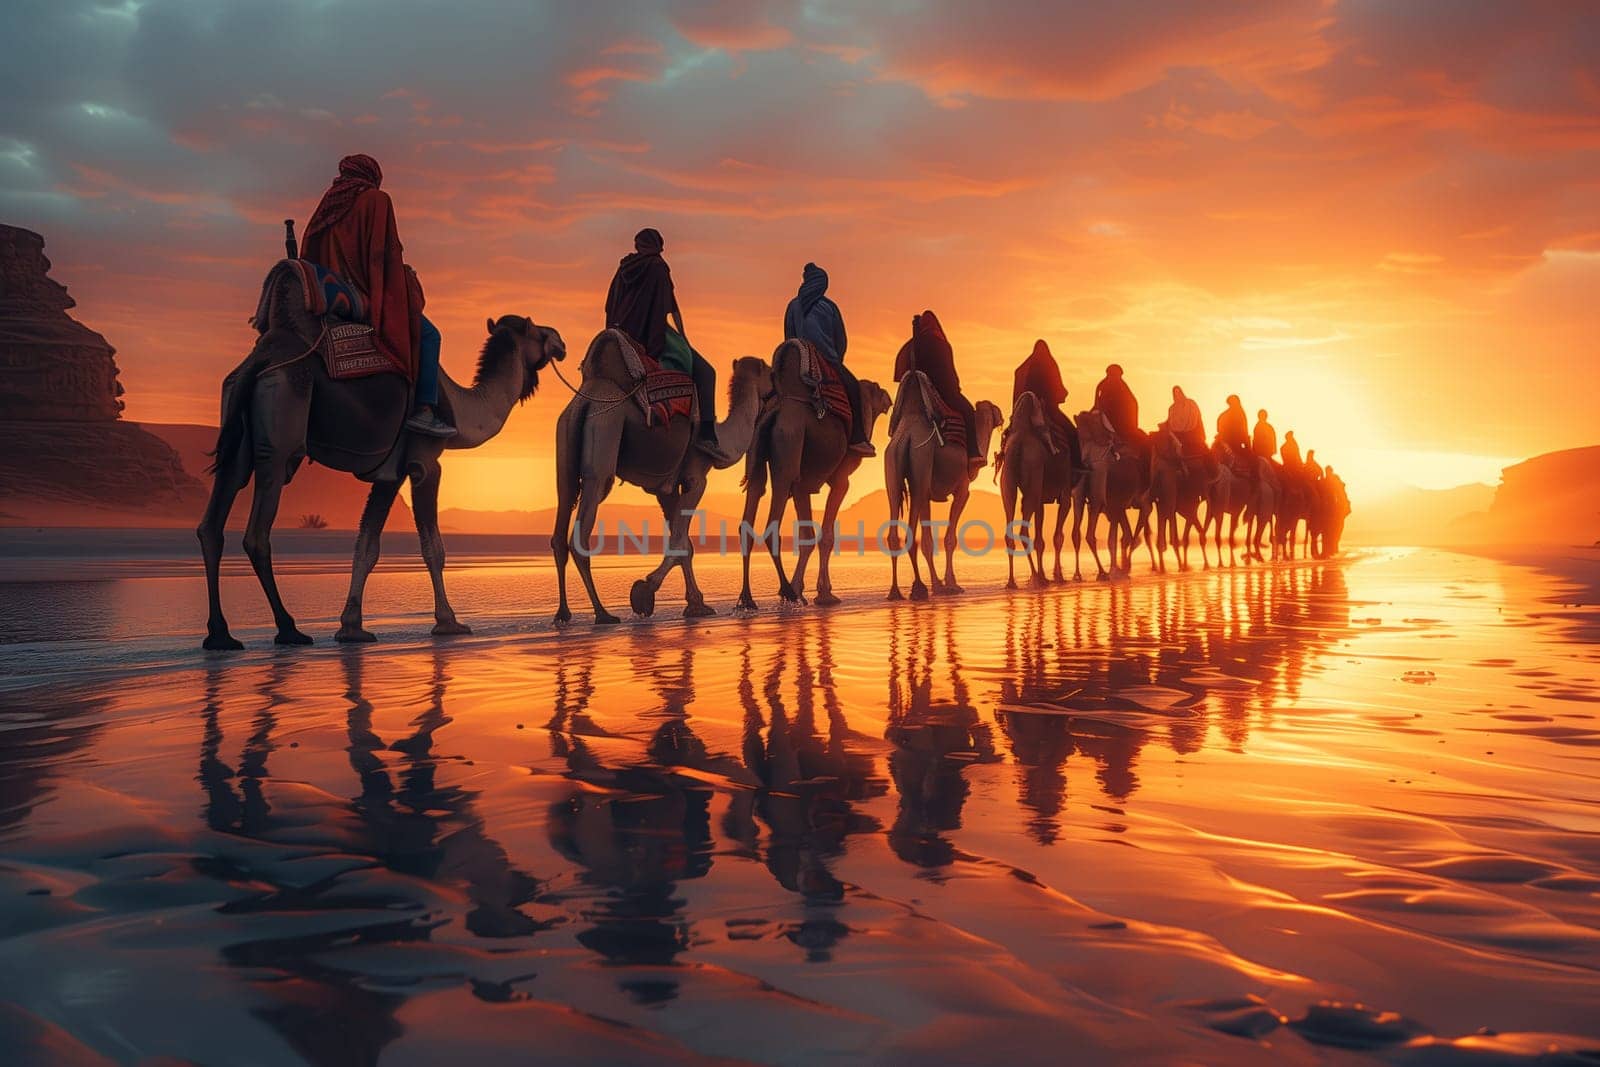 A group of individuals enjoying a camel ride along the beach at dusk, surrounded by the beautiful natural landscape of water, sky, clouds, and the stunning afterglow of the sunset